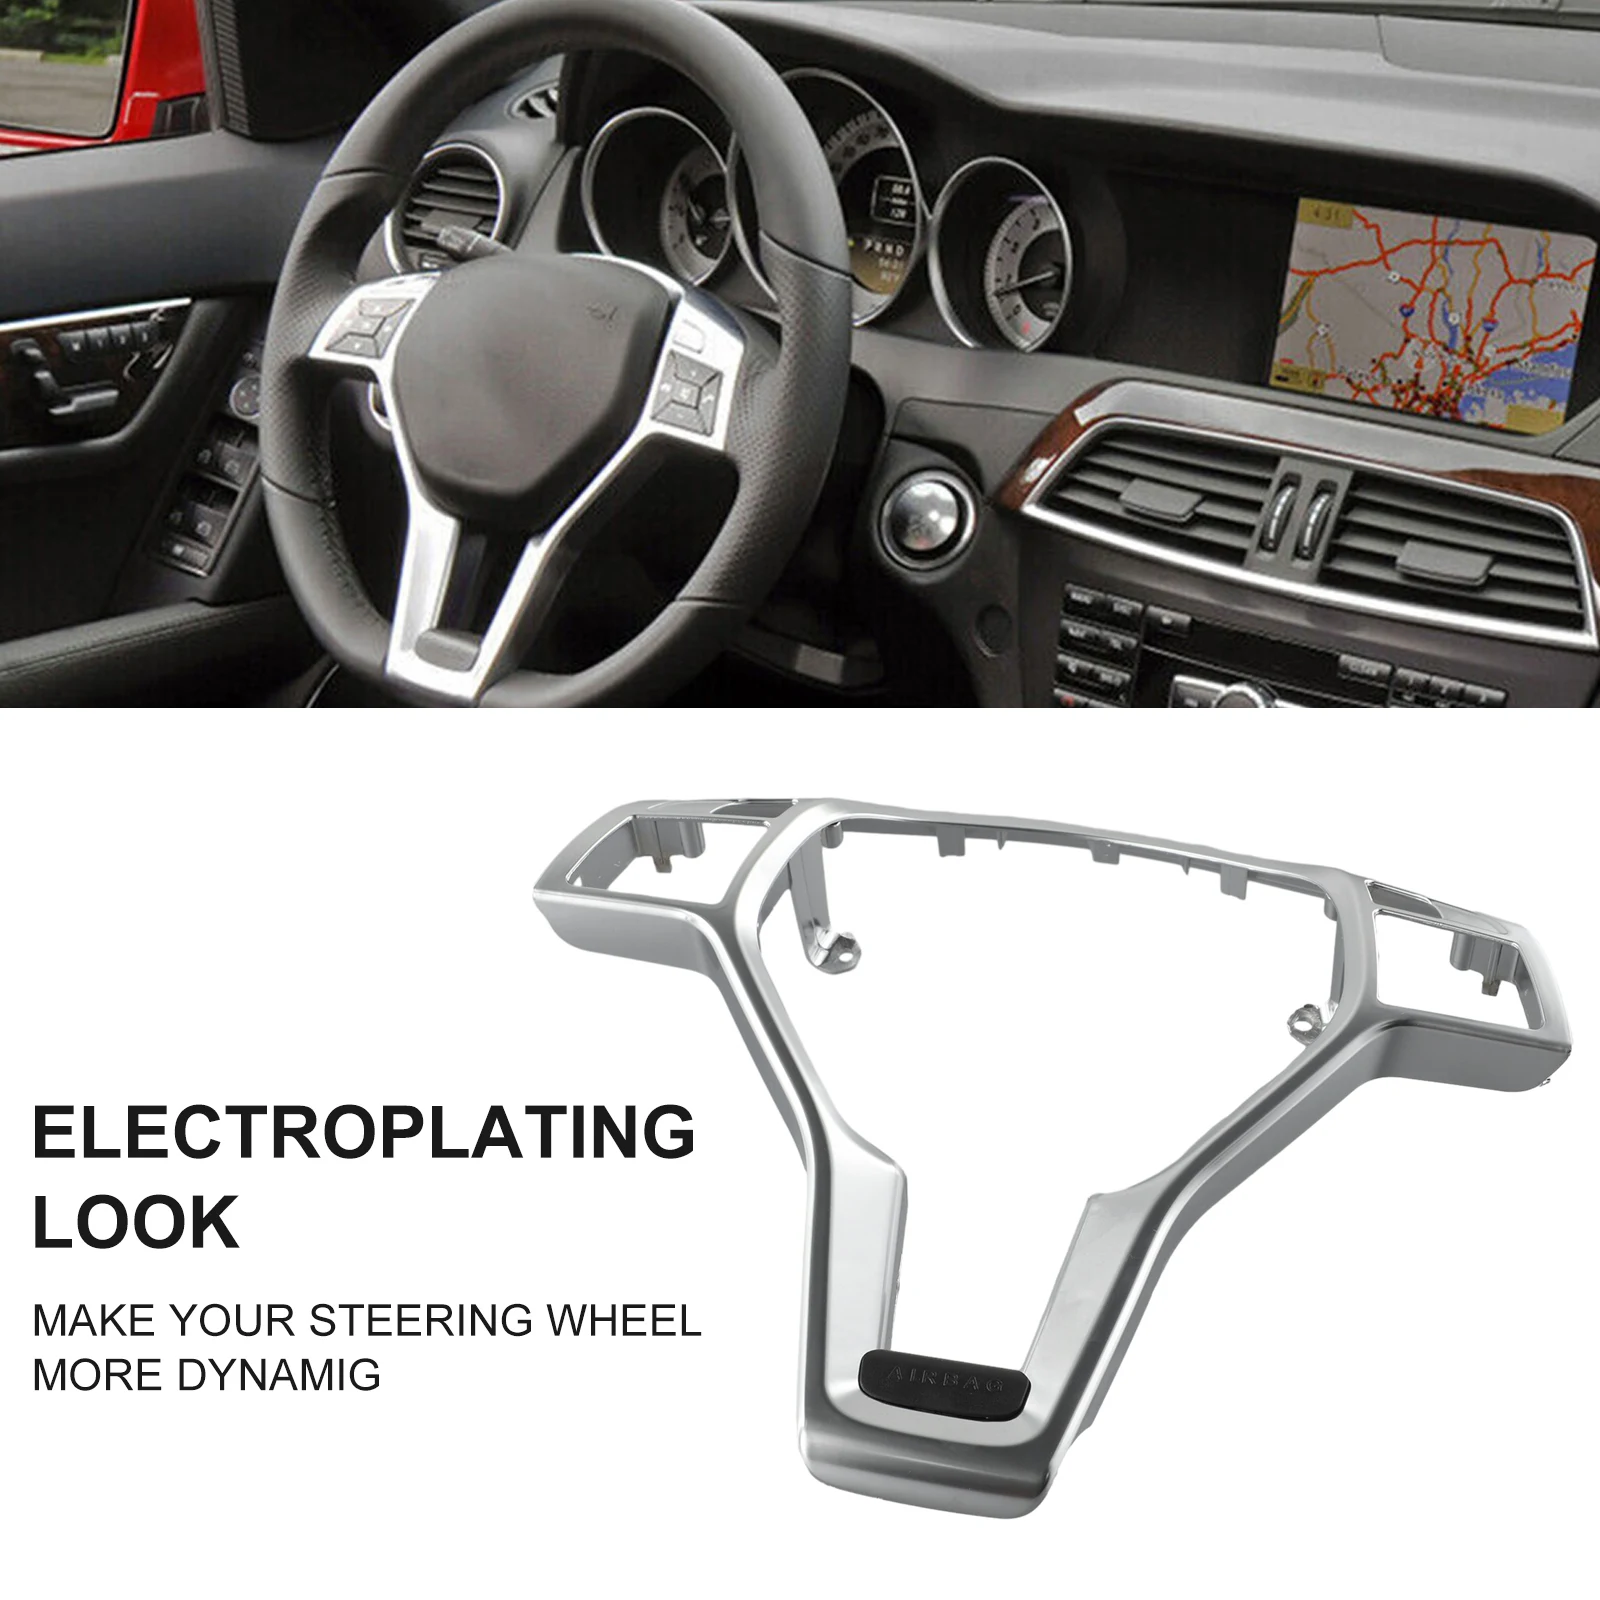 

1x Steering Wheel Direct Installation For Benz For Mercedes Silver W204 W212 C E CLA 2012-14 Correct Connector